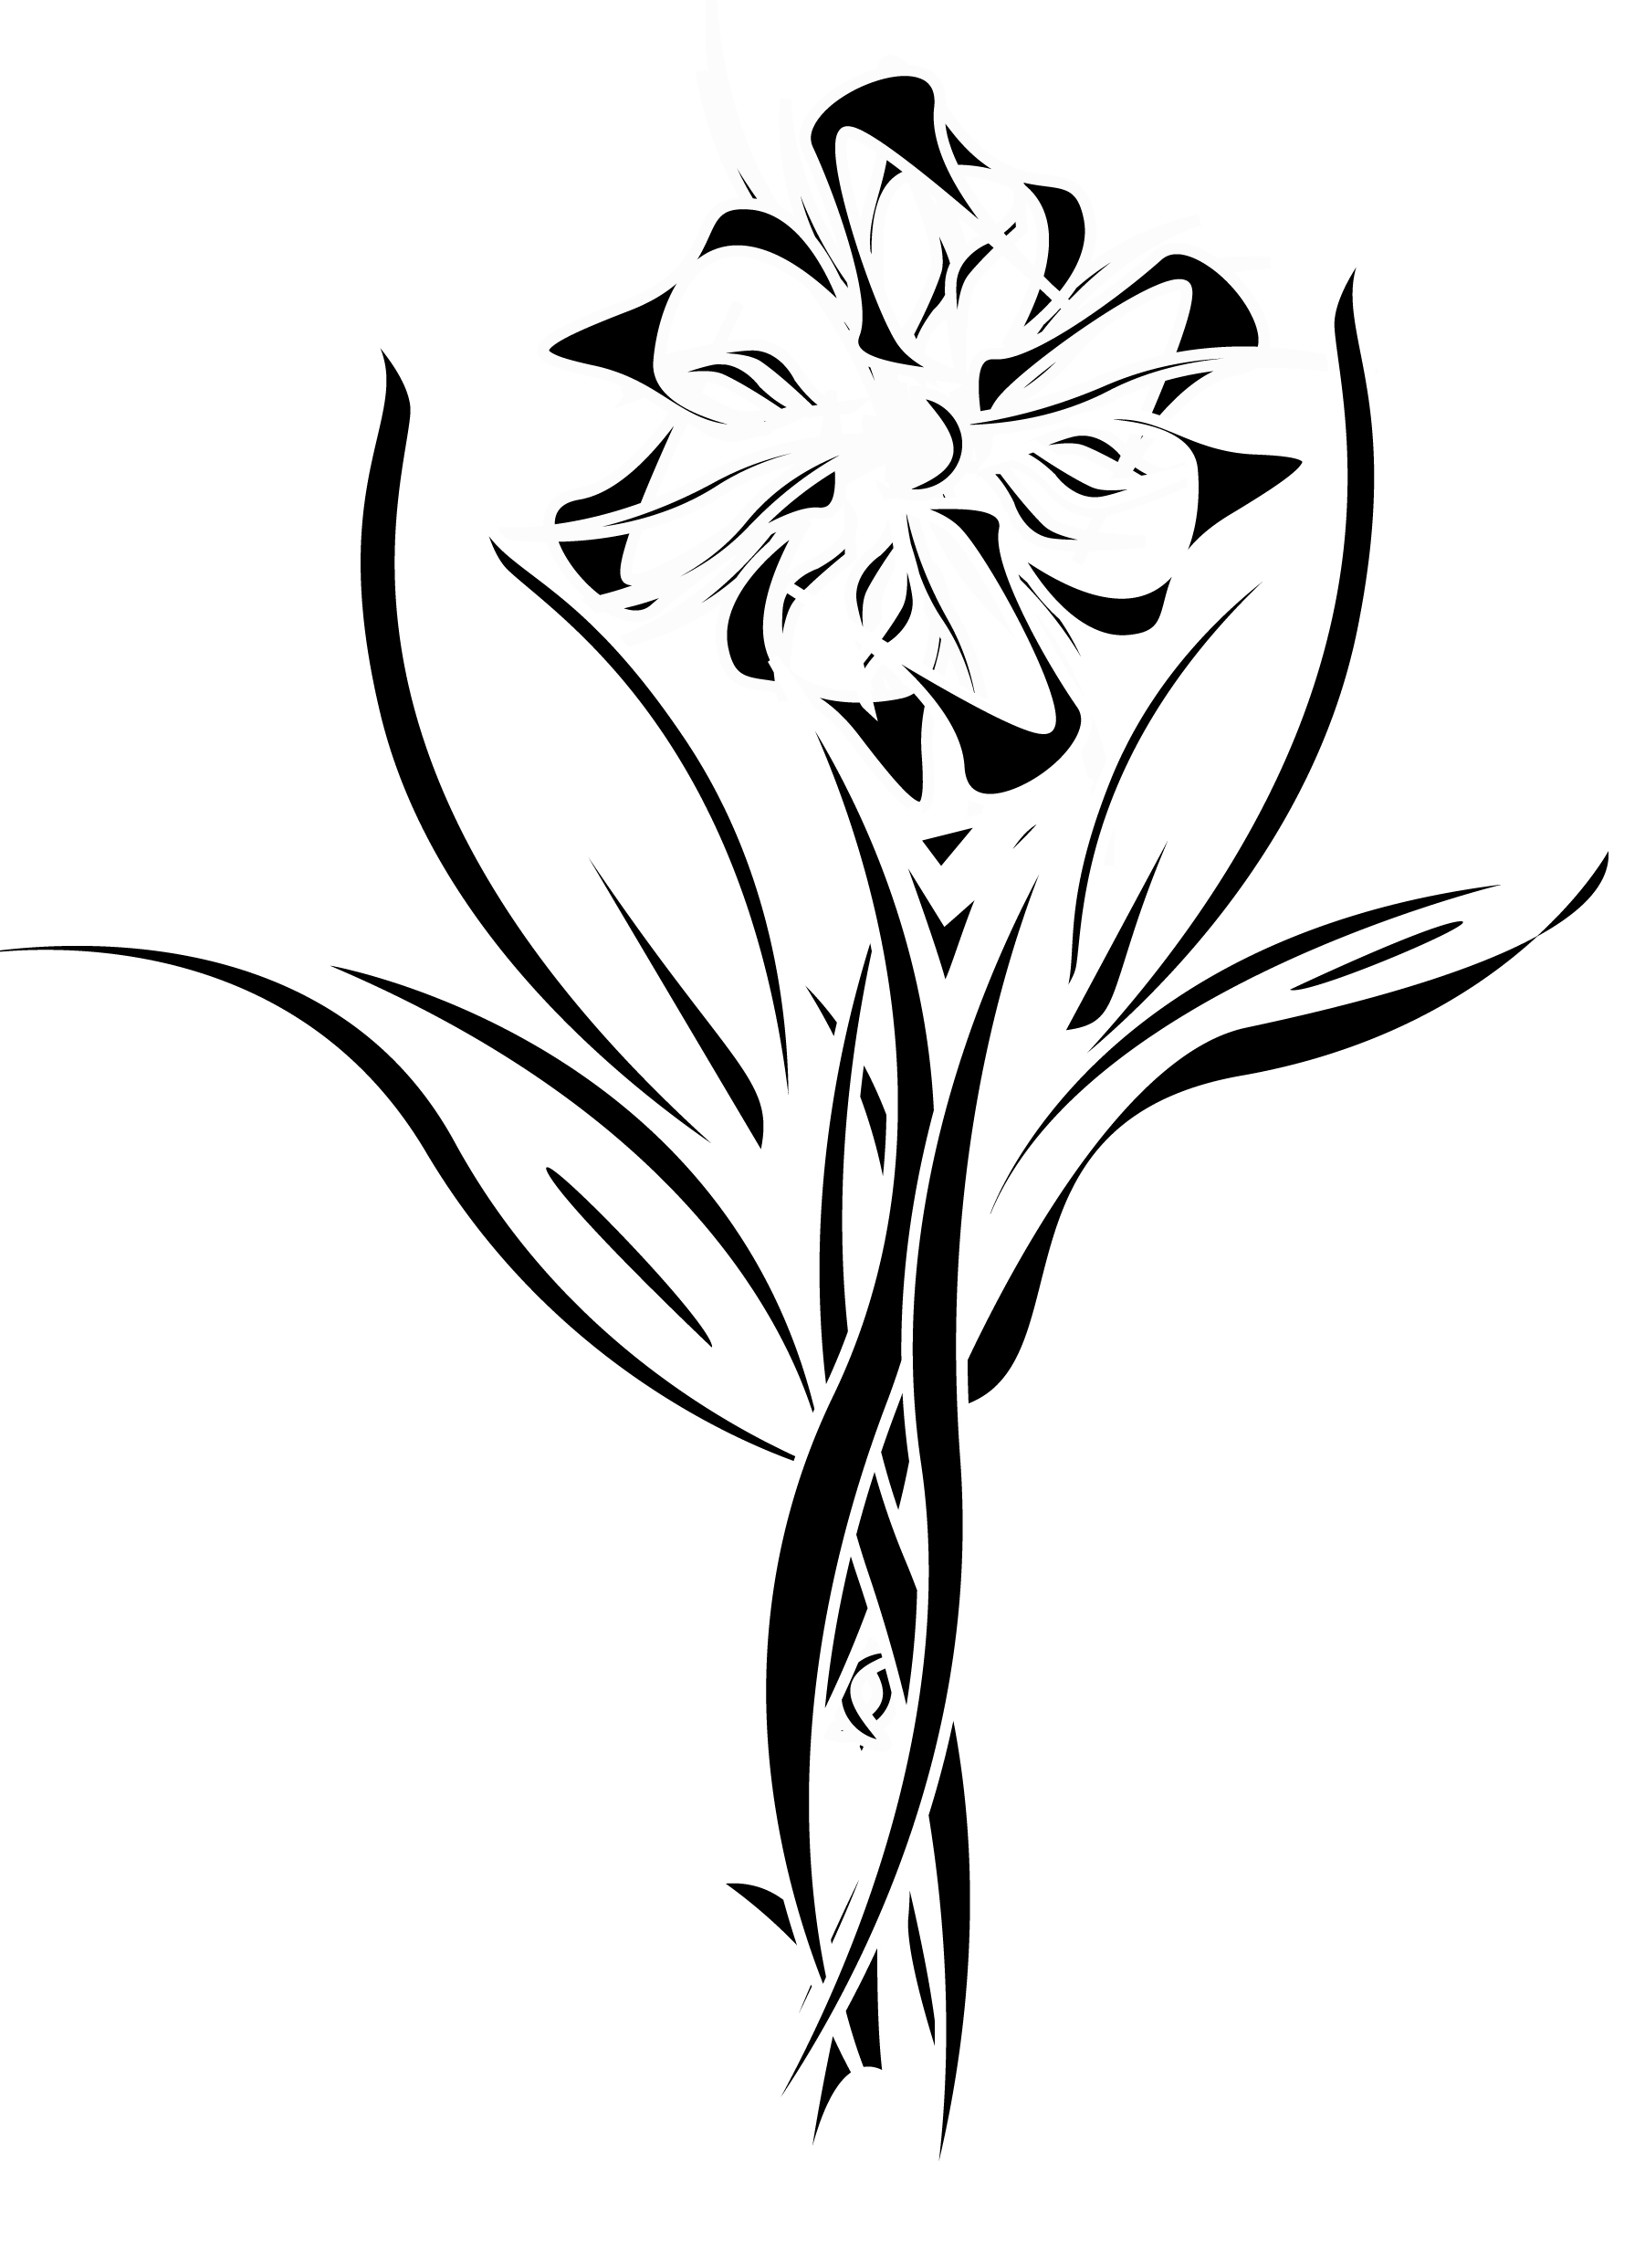 Flower Tribal by MordridFantastic on Clipart library